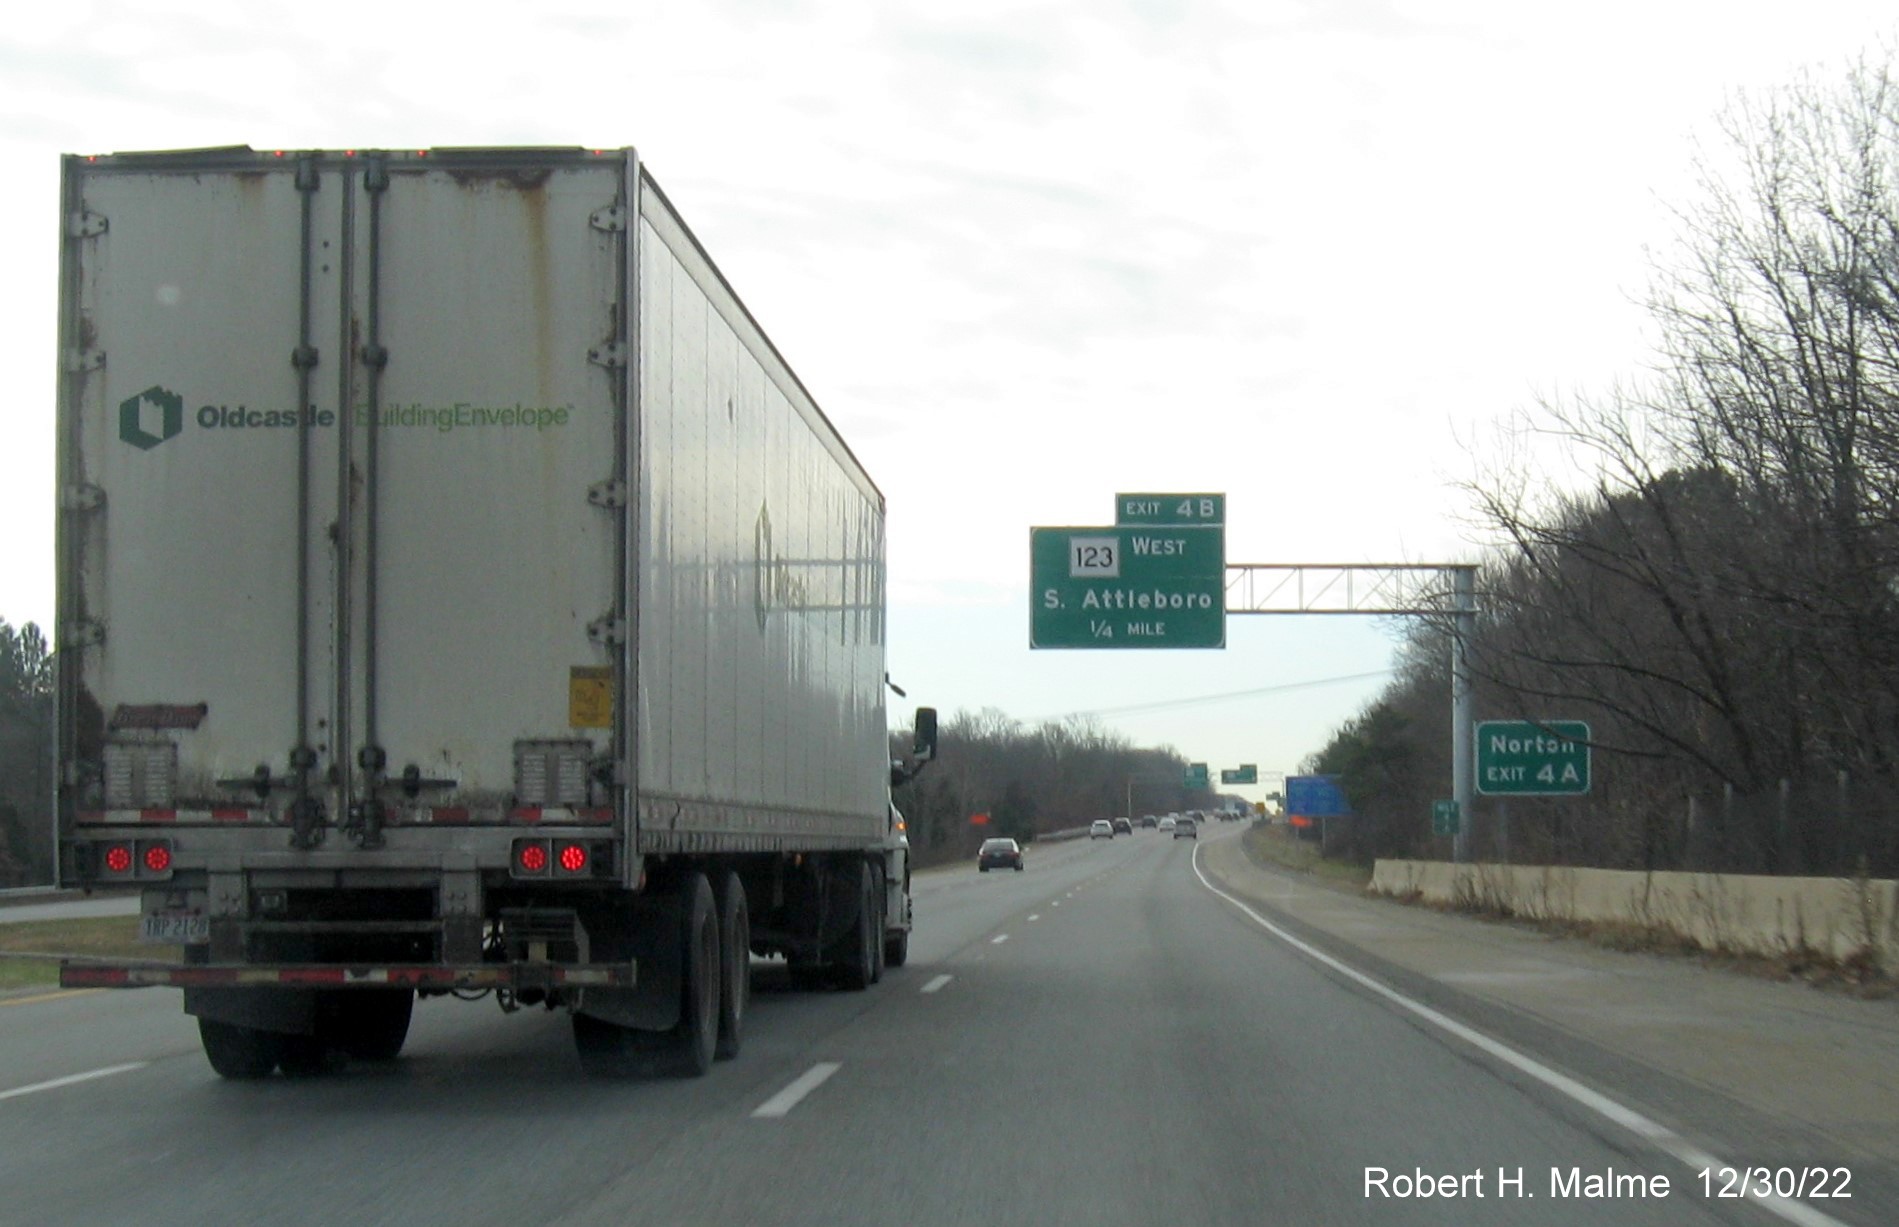 Image of fixed auxiliary sign for MA 123 East exit on I-95 South in Attleboro, December 2022